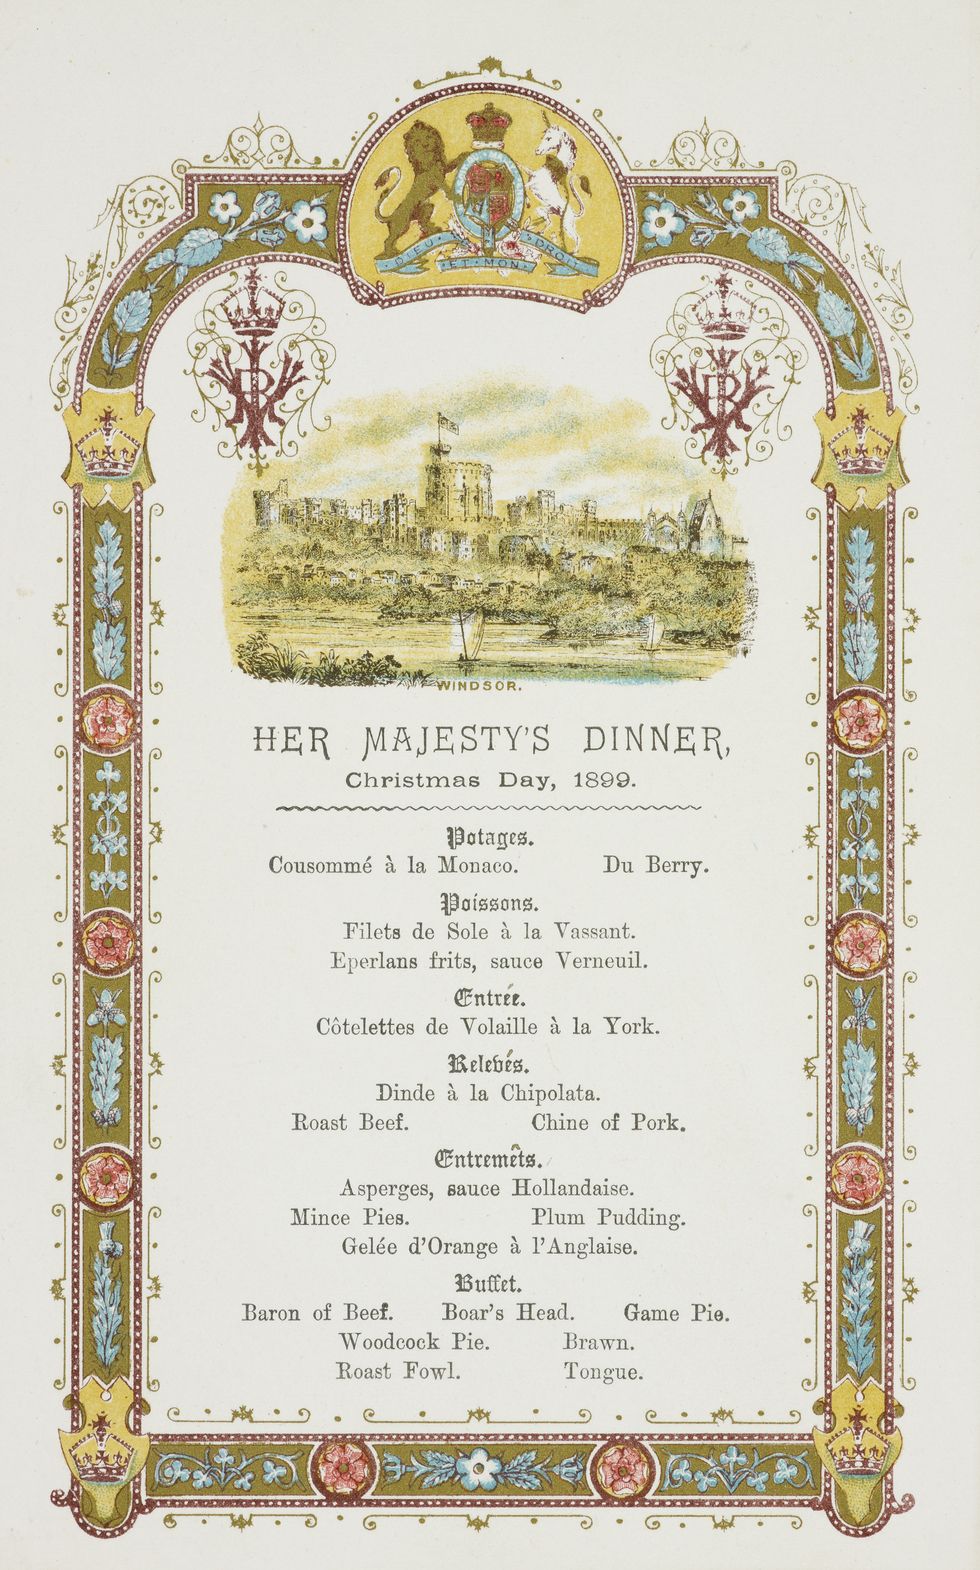 Menu for Queen Victoria’s dinner, Christmas Day, 1899.